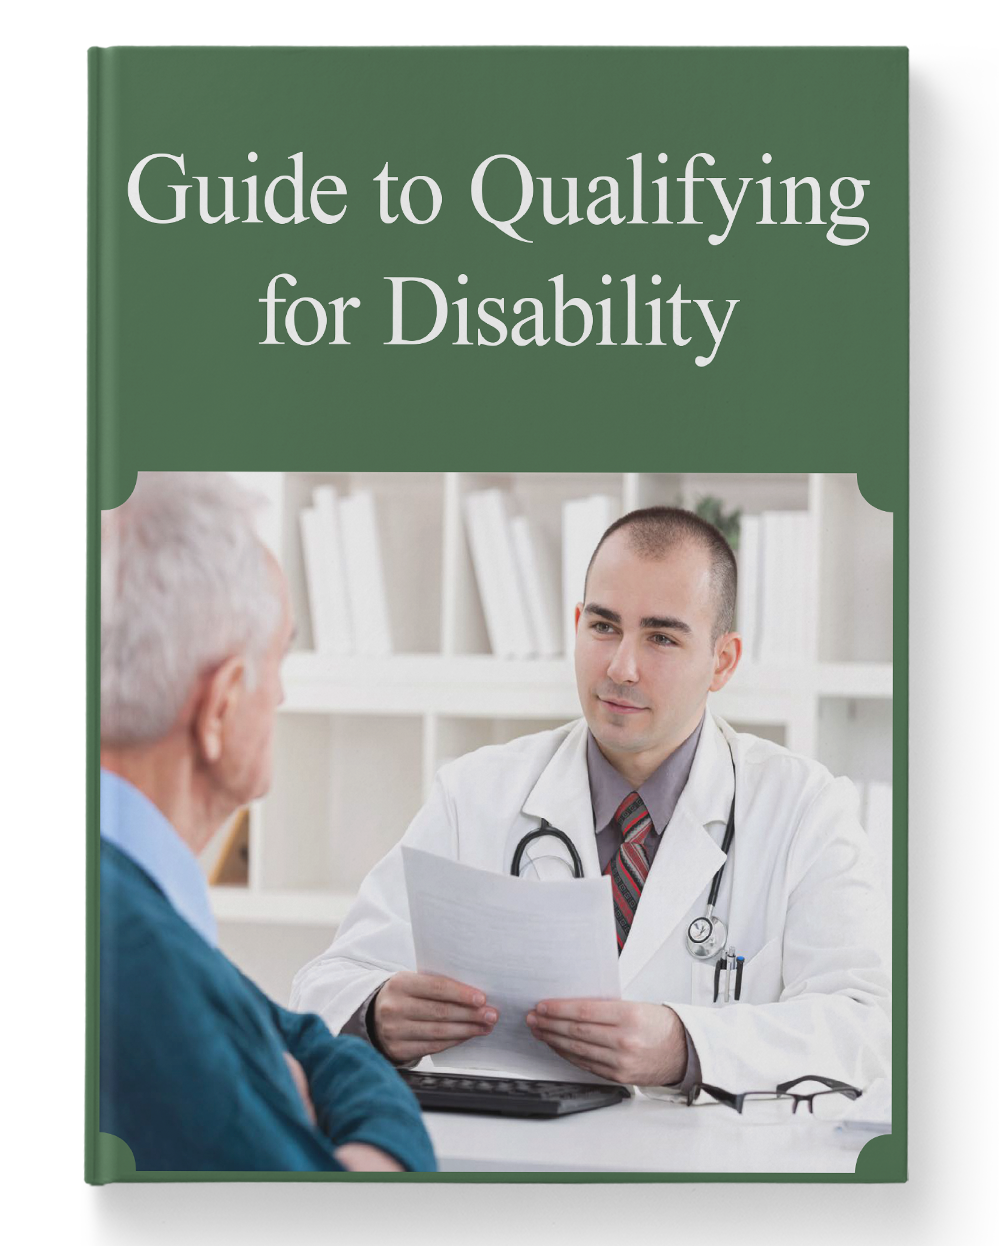 A Guide to Qualifying for Disability